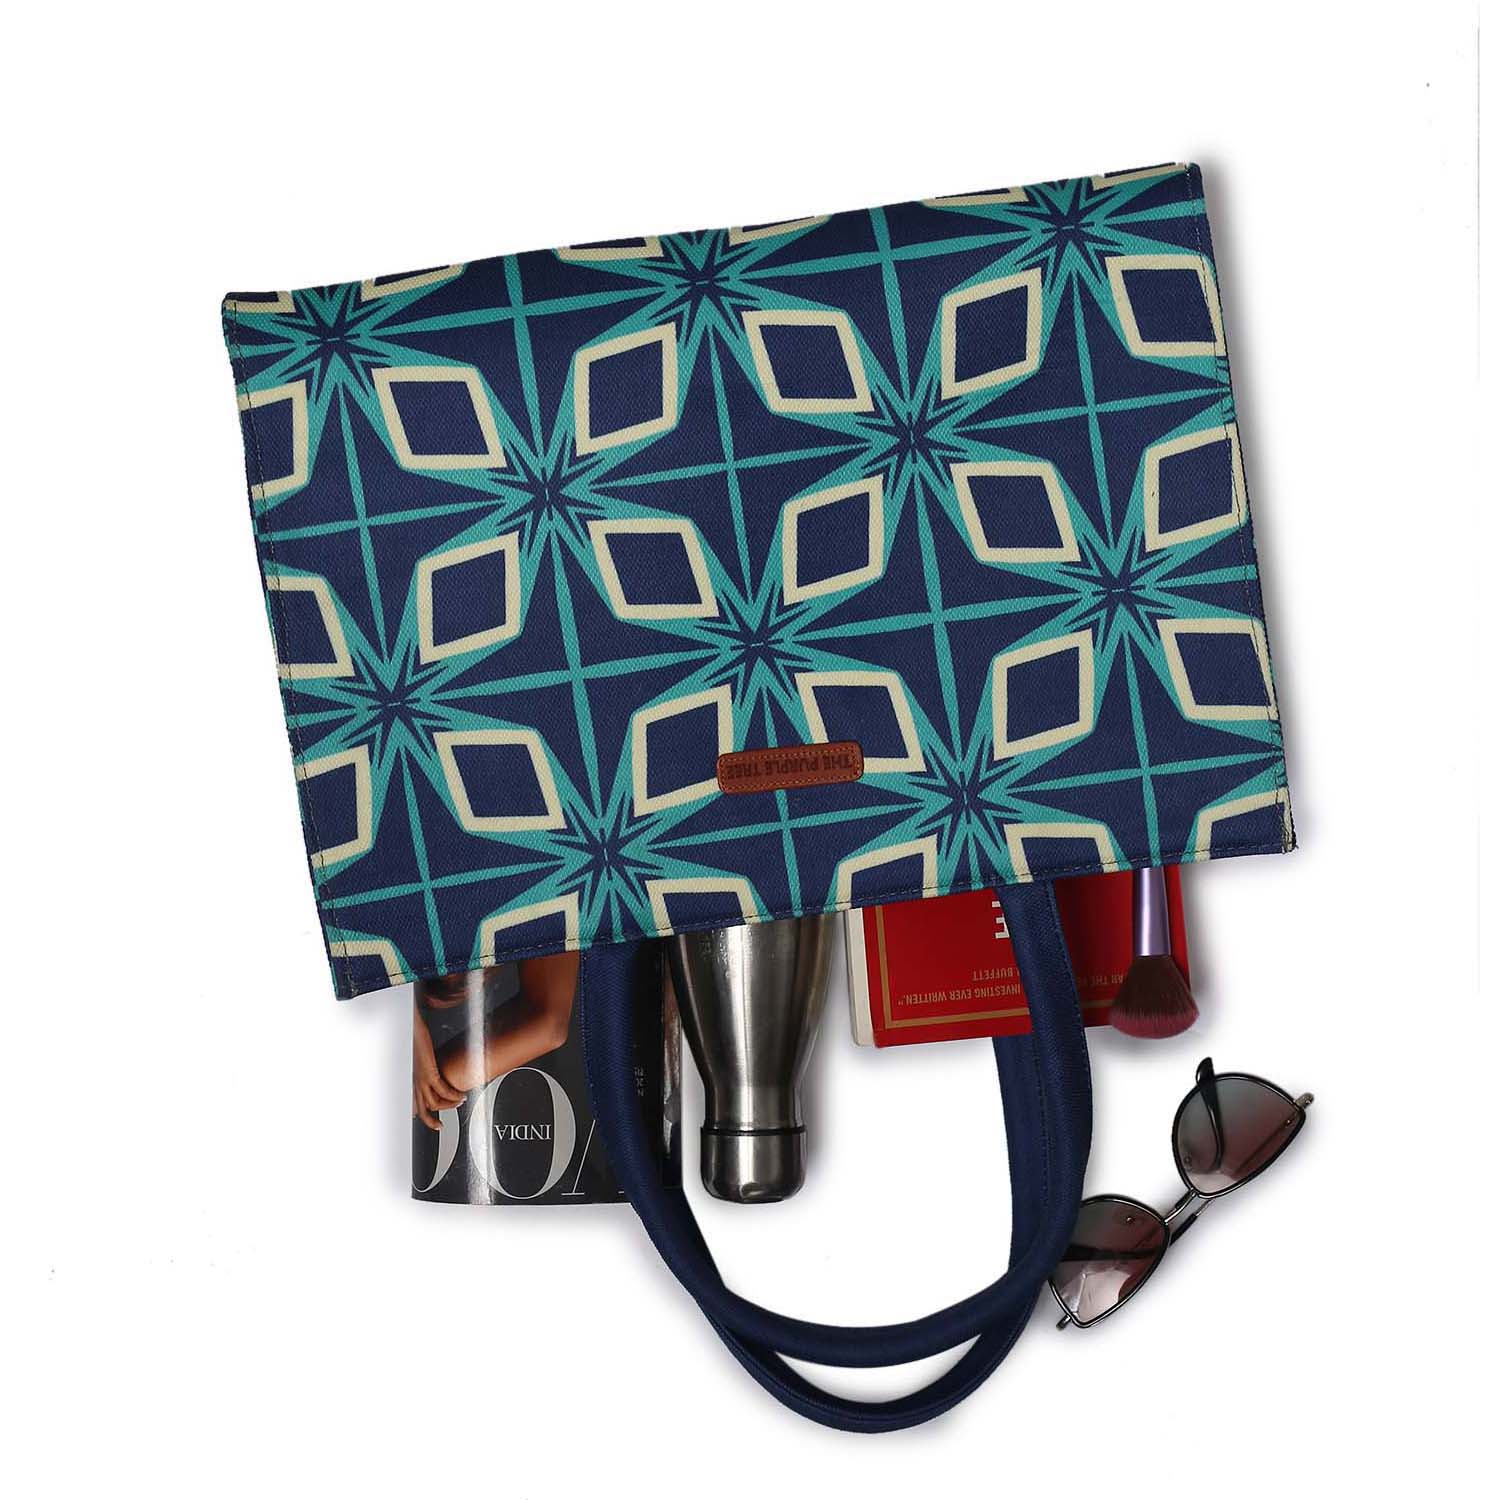 An eye-catching tote bag adorned with a blue and green pattern, accompanied by a book and another book.